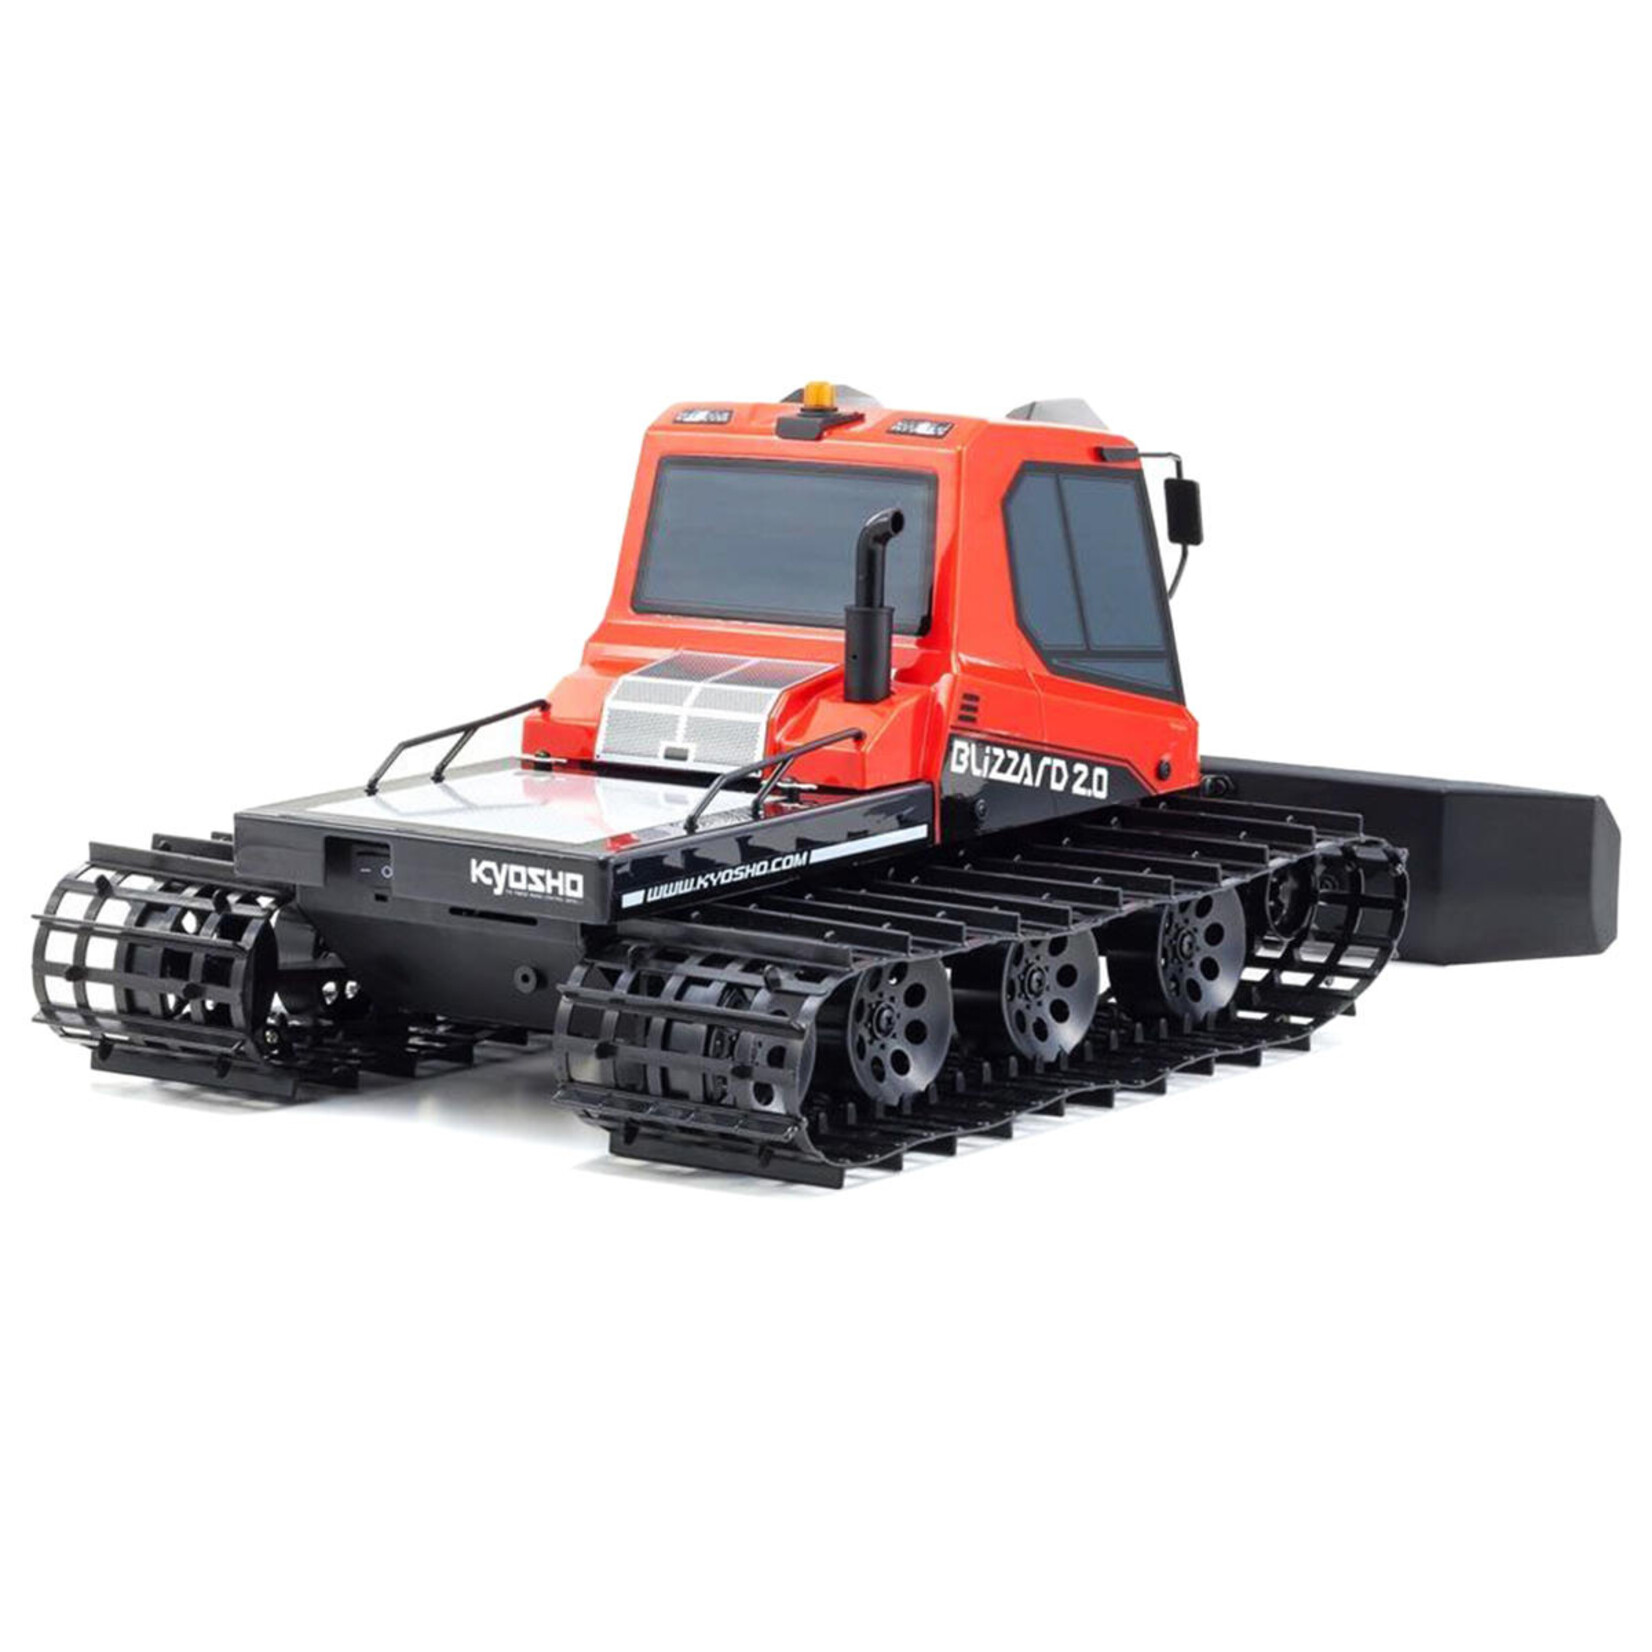 Kyosho Kyosho Blizzard 2.0 1/12 Scale ReadySet All Terrain Snow Cat w/2.4GHz Radio, Battery & Charger #34902C